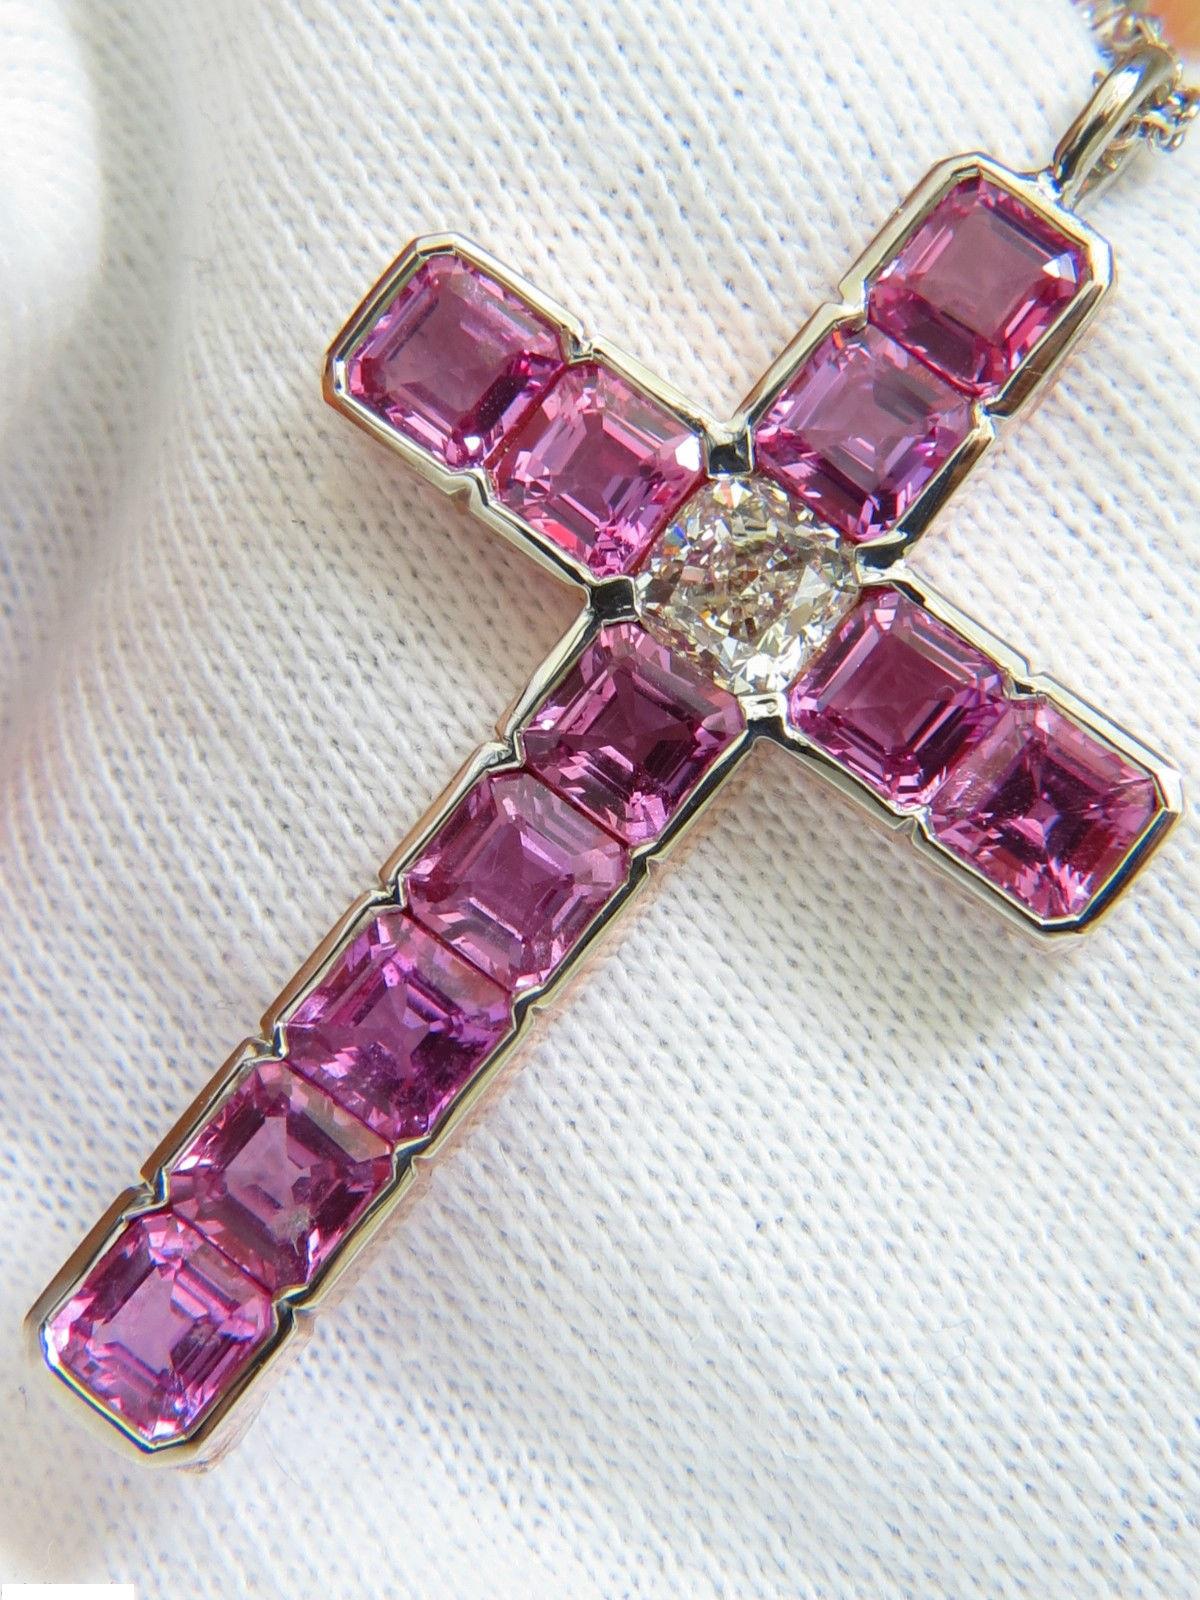 Prime Cross

GIA 1.01ct. Cushion Cut Diamond

Report# 5141777173

K-color Si-1 clarity



9.00ct. Natural Ascher cut Pink Sapphires

Clear Clarity & Amazing Transparency.



Additional diamonds on chain:

.40ct. Rounds, full cut.

H-color, Vs-2